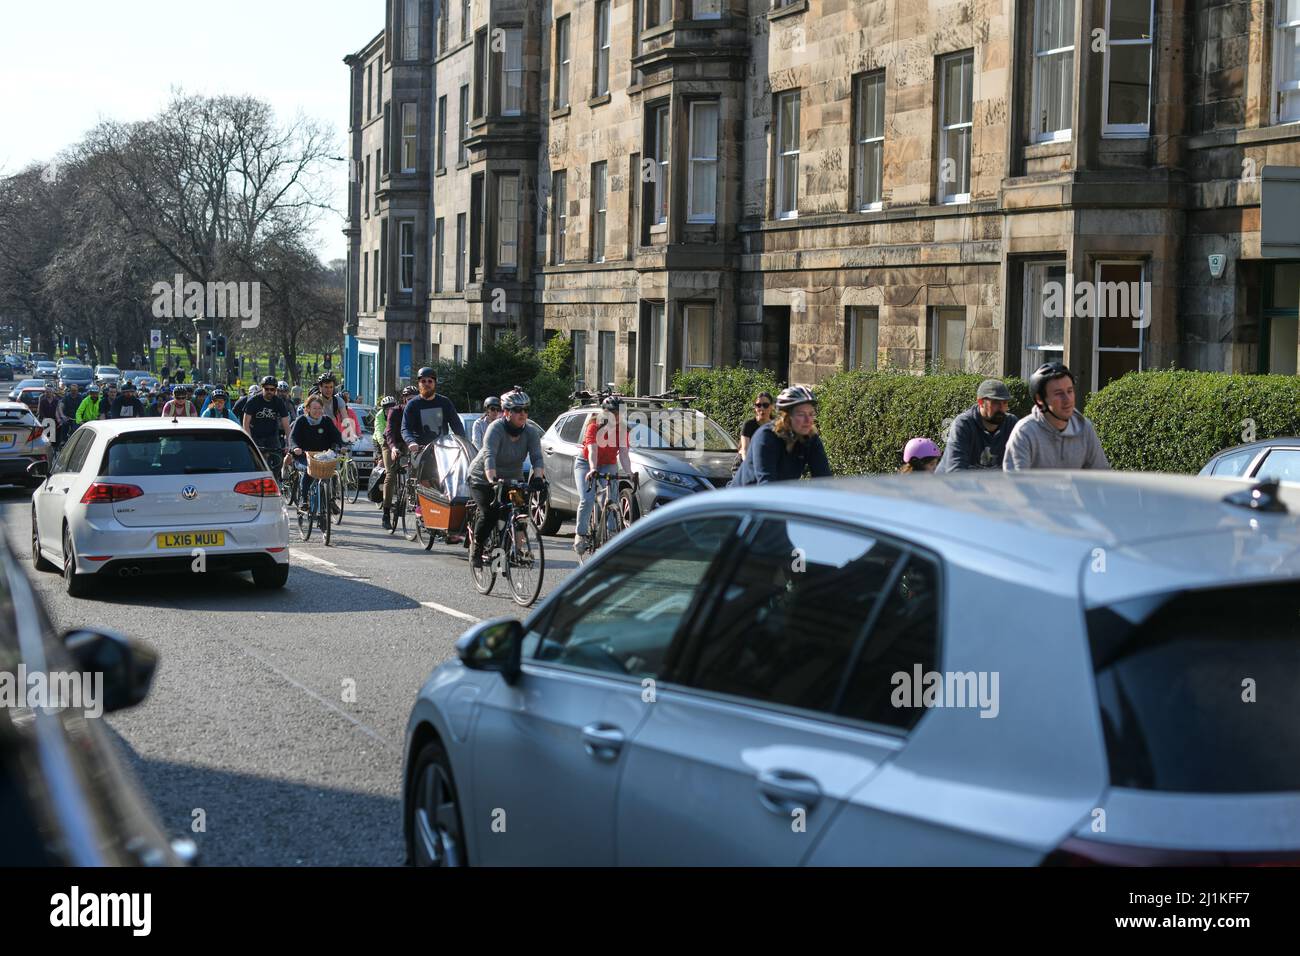 Edinburgh Scotland, UK March 26 2022. Edinburgh Critical Mass Cycle, Stockbridge Saunter, takes place through the city with hundreds taking part as society transitions from cars to more sustainable forms of transport.  credit sst/alamy live news Stock Photo